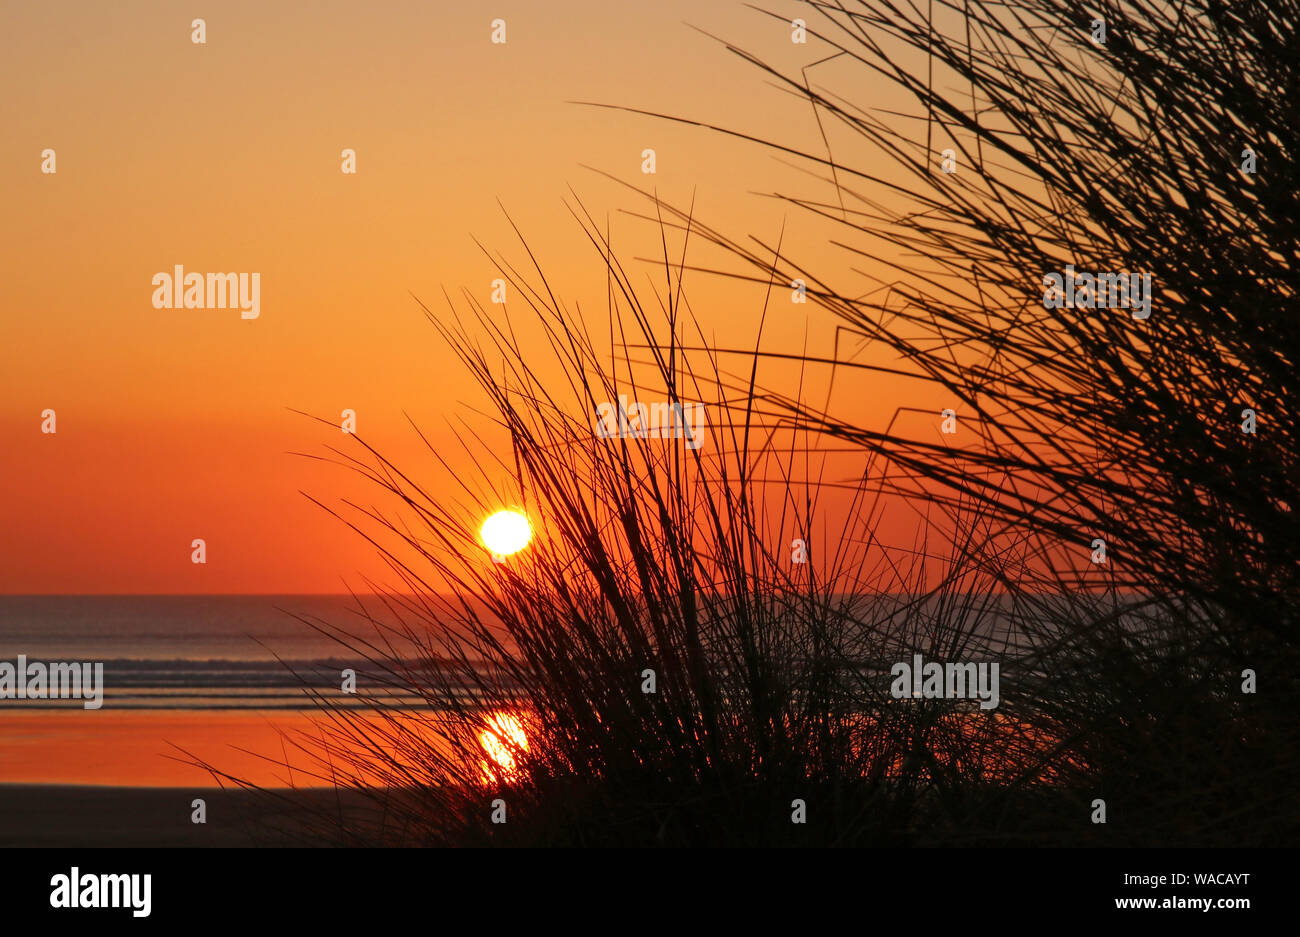 Stunning sunset on a sandy beach with soft Marram grass blowing in the foreground Stock Photo